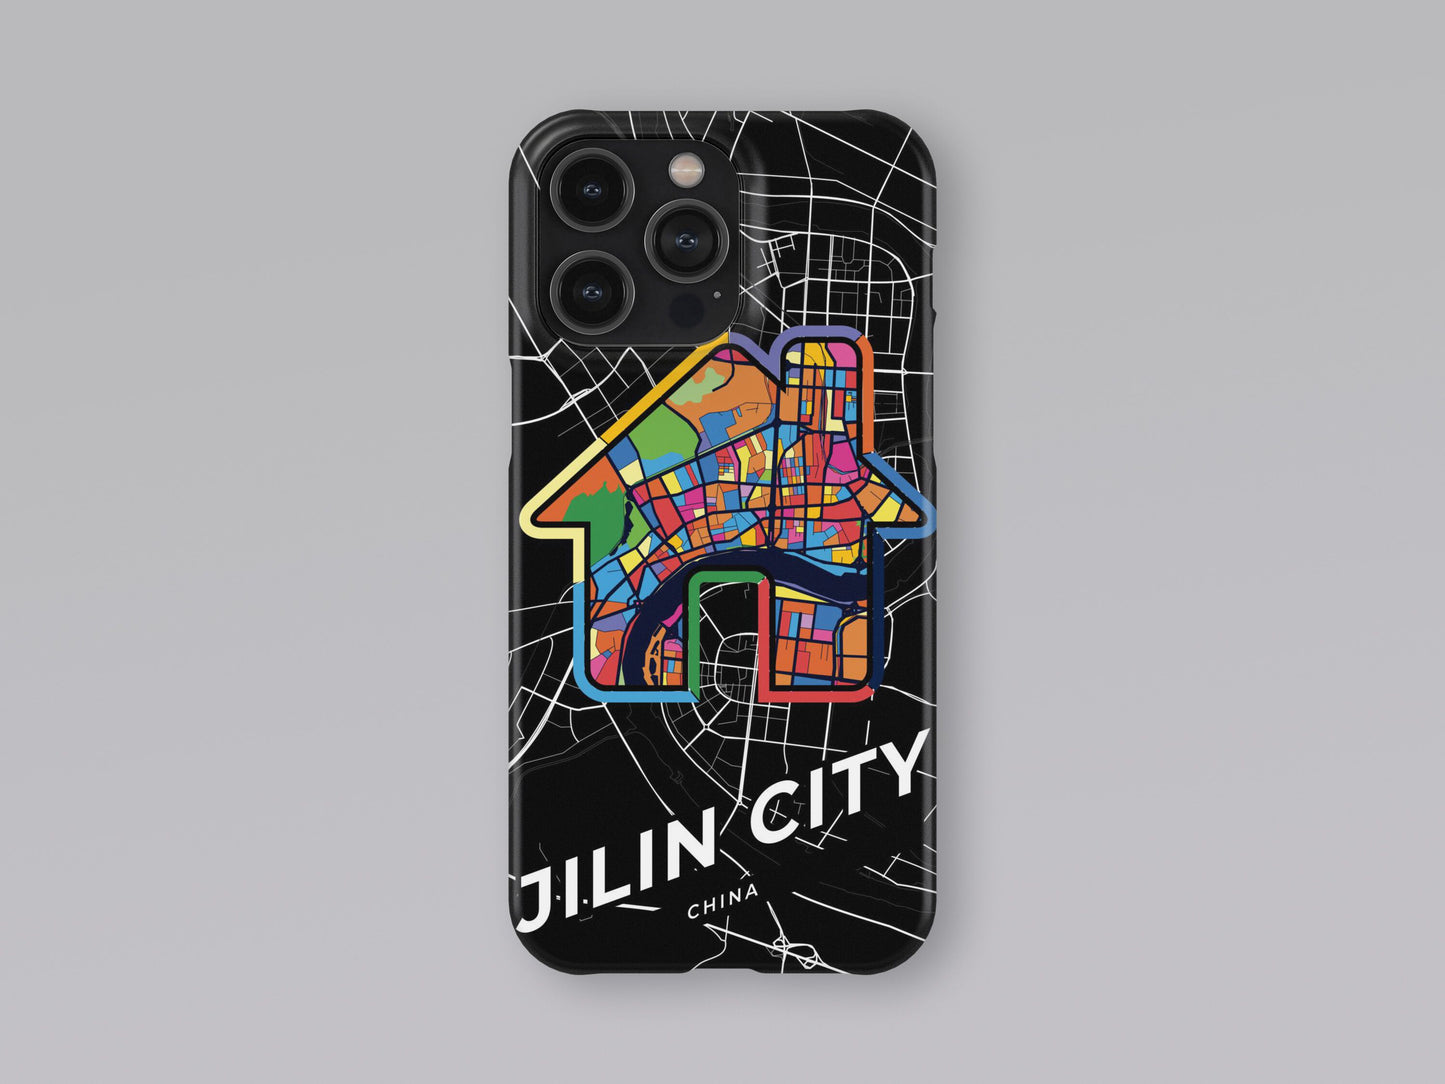 Jilin City China slim phone case with colorful icon. Birthday, wedding or housewarming gift. Couple match cases. 3